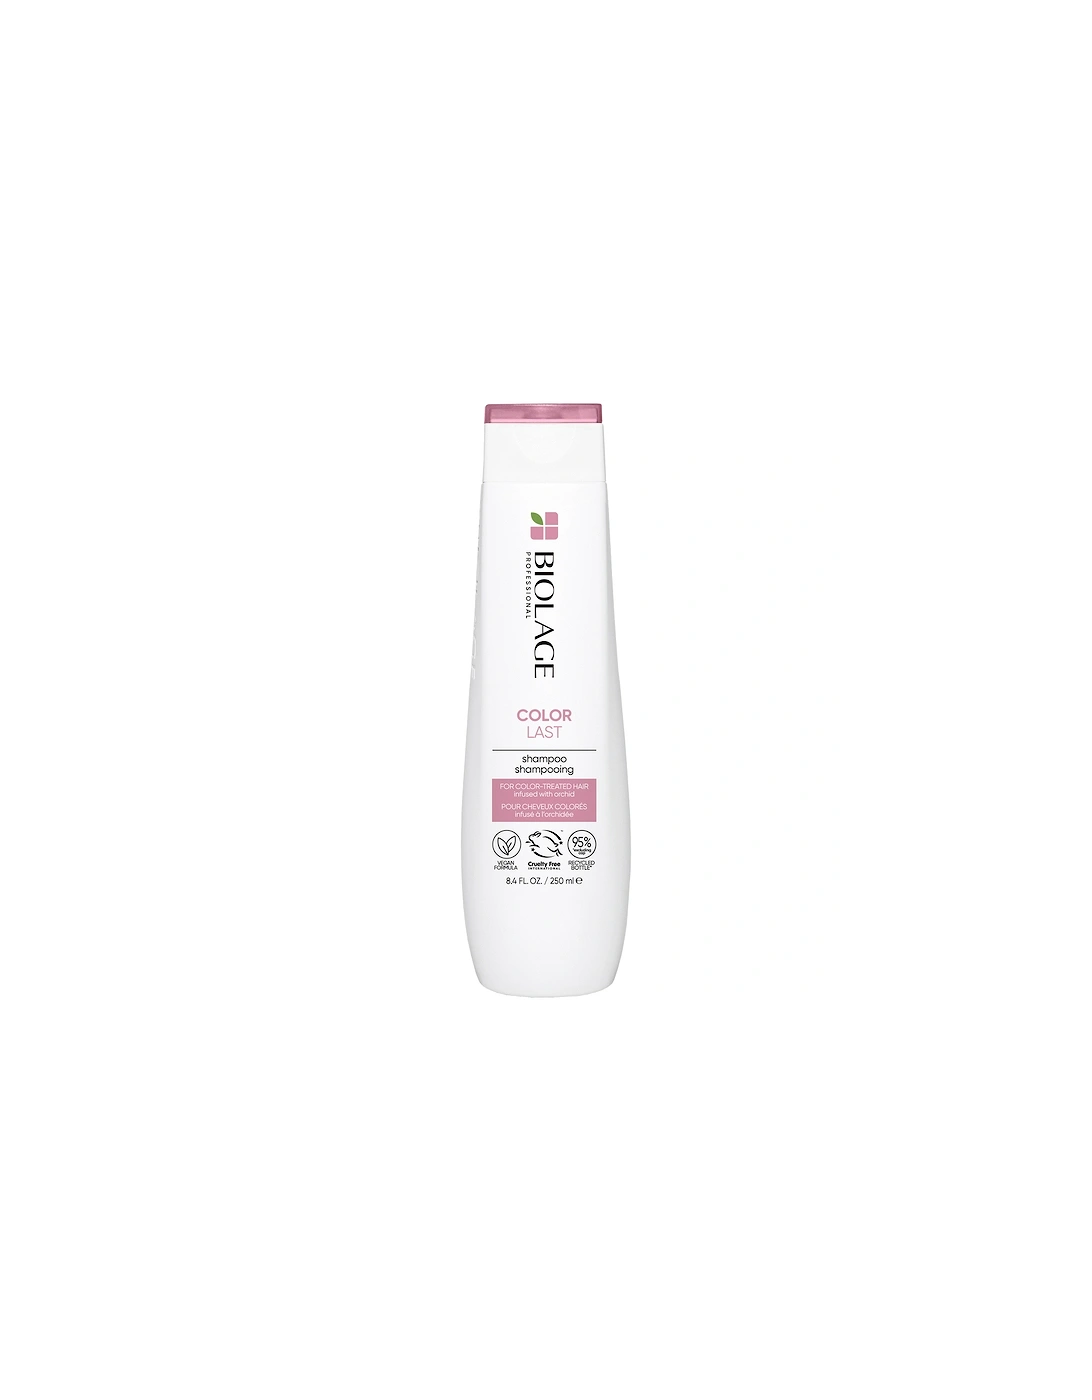 ColorLast Shampoo for Coloured Hair Protection 250ml, 2 of 1